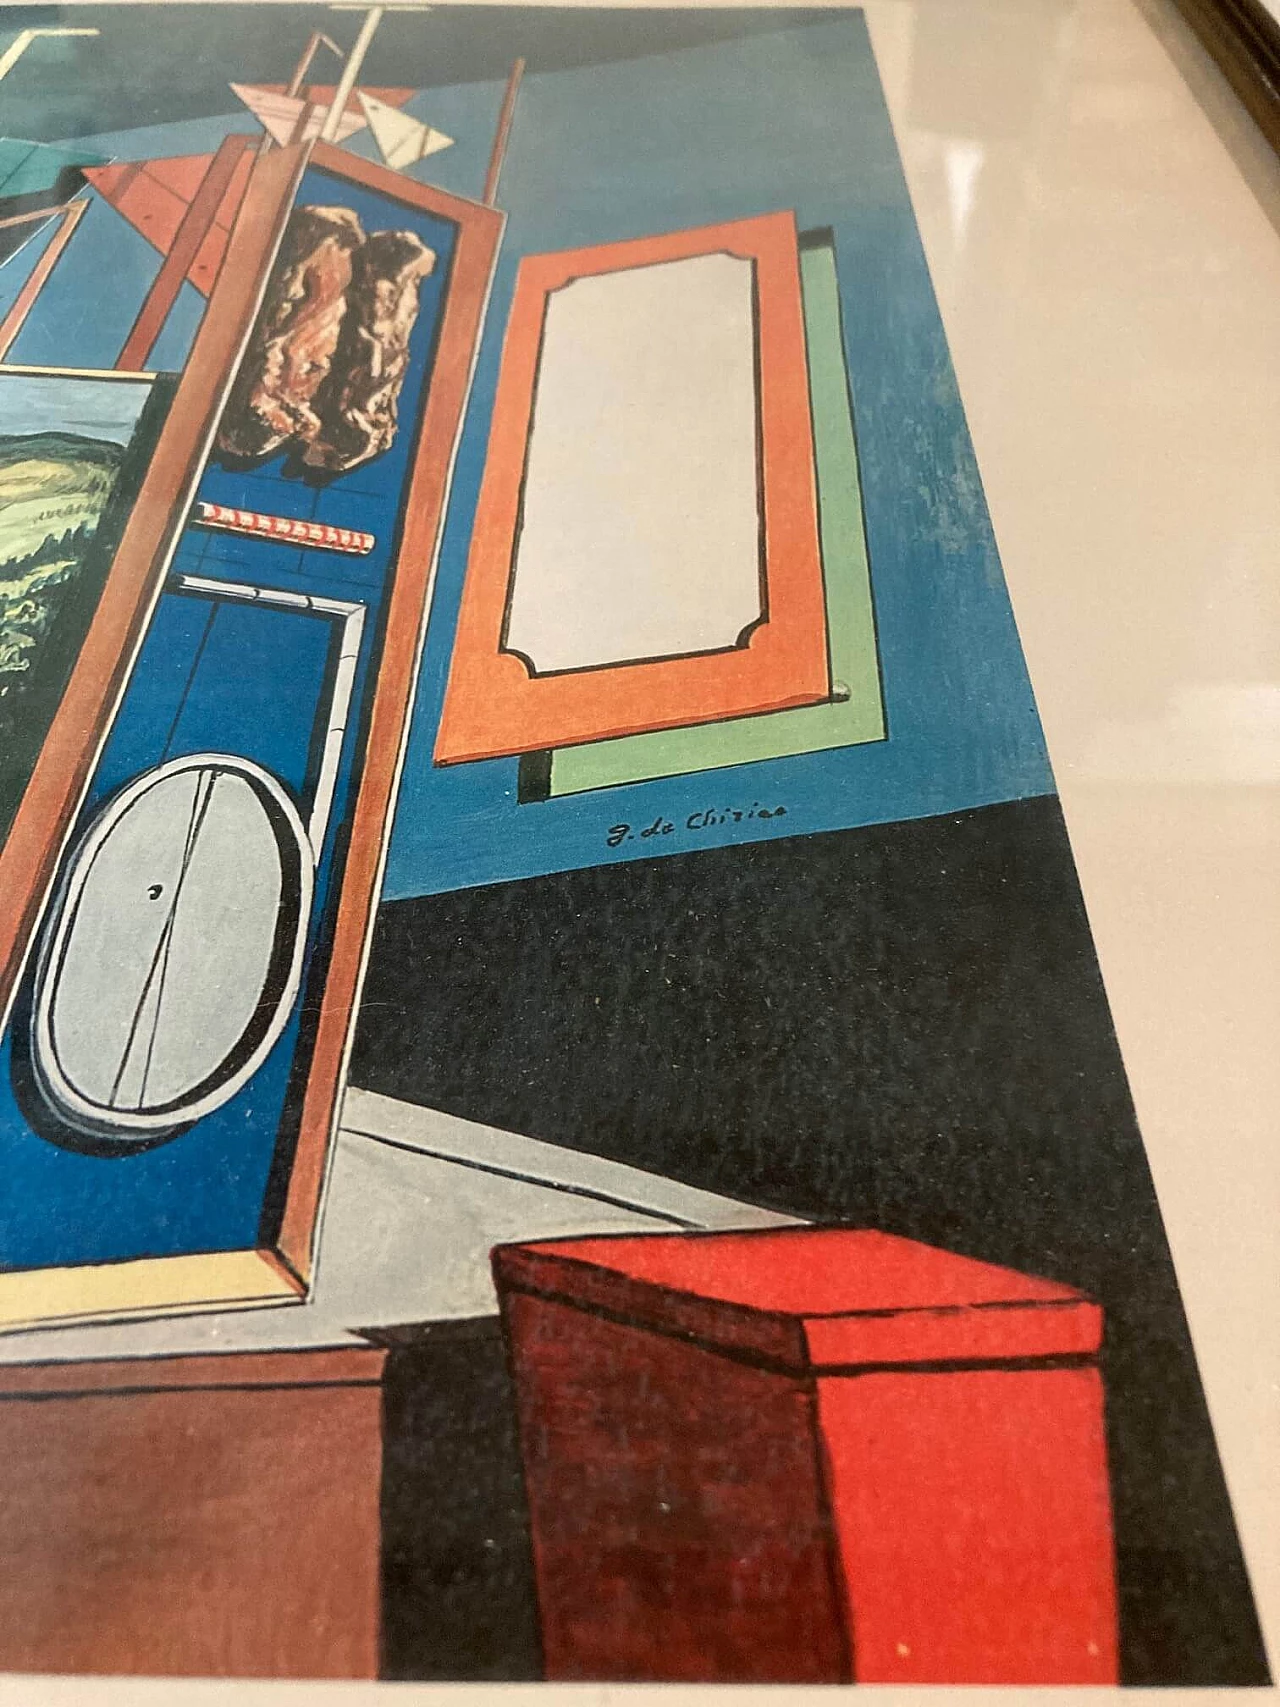 Giorgio De Chirico, Metaphysical interior with biscuits, lithography, 1968 11